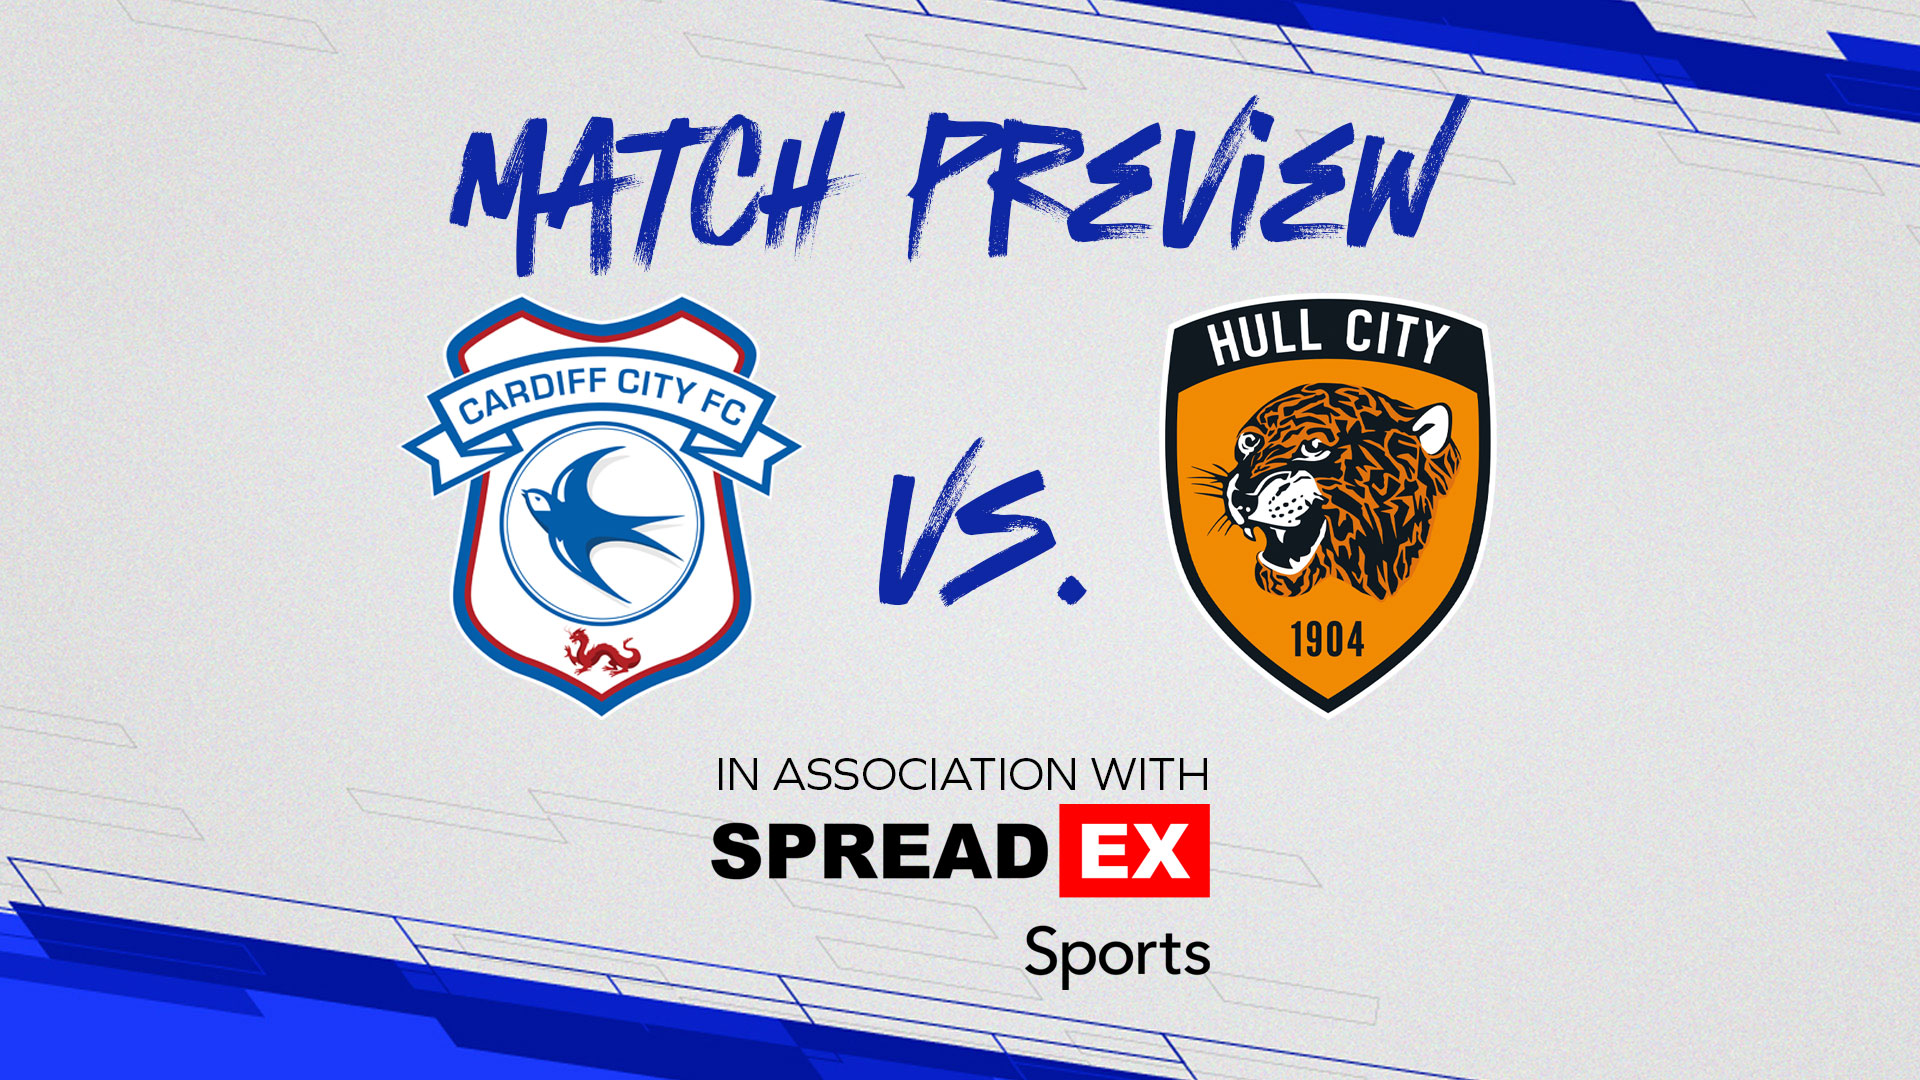 Match Preview: Cardiff City vs. Hull City